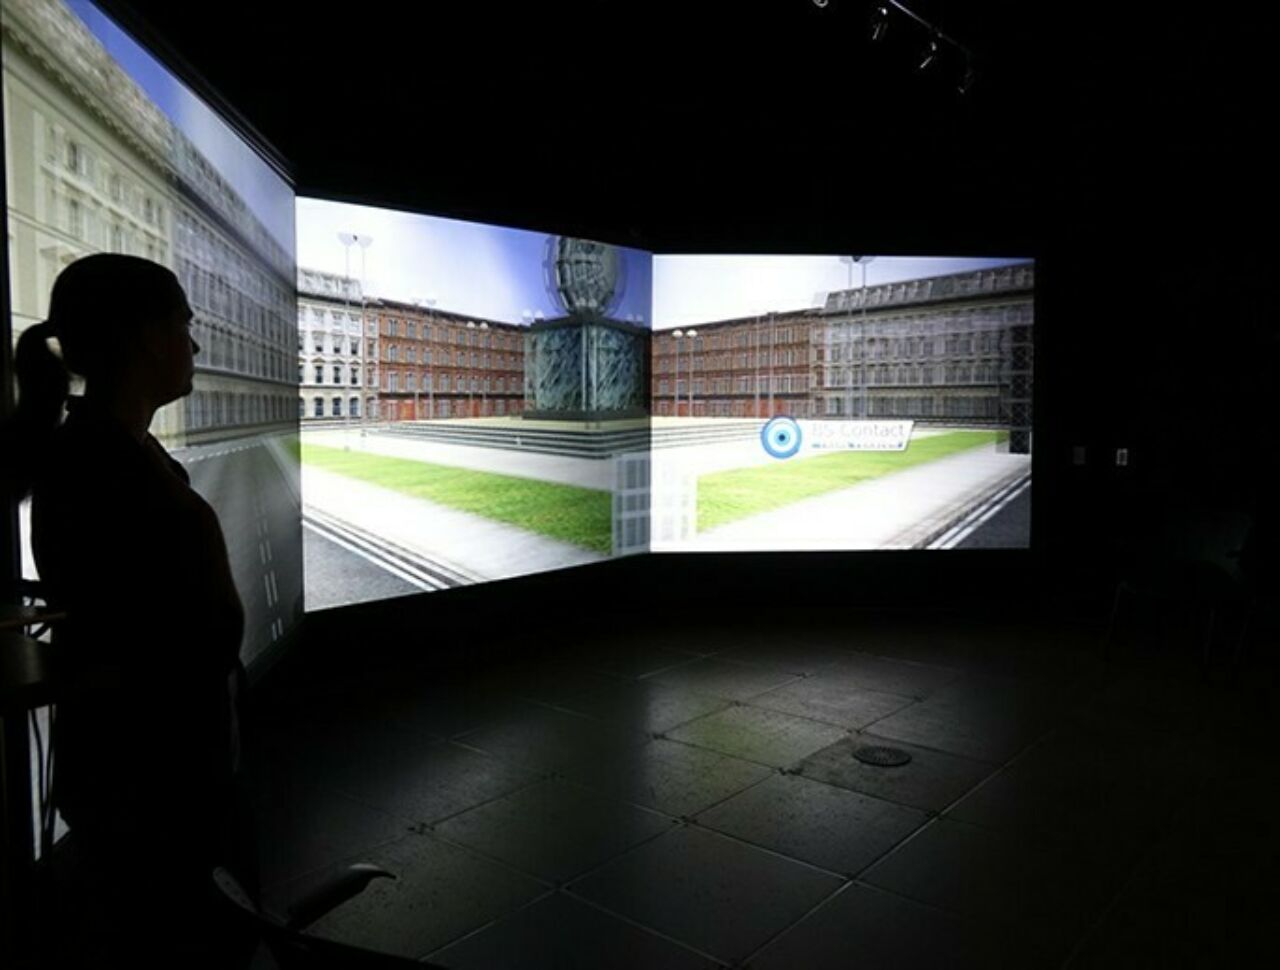 A female student's profile at left against an immersive reality background on a screen behind her in a darkened lab.